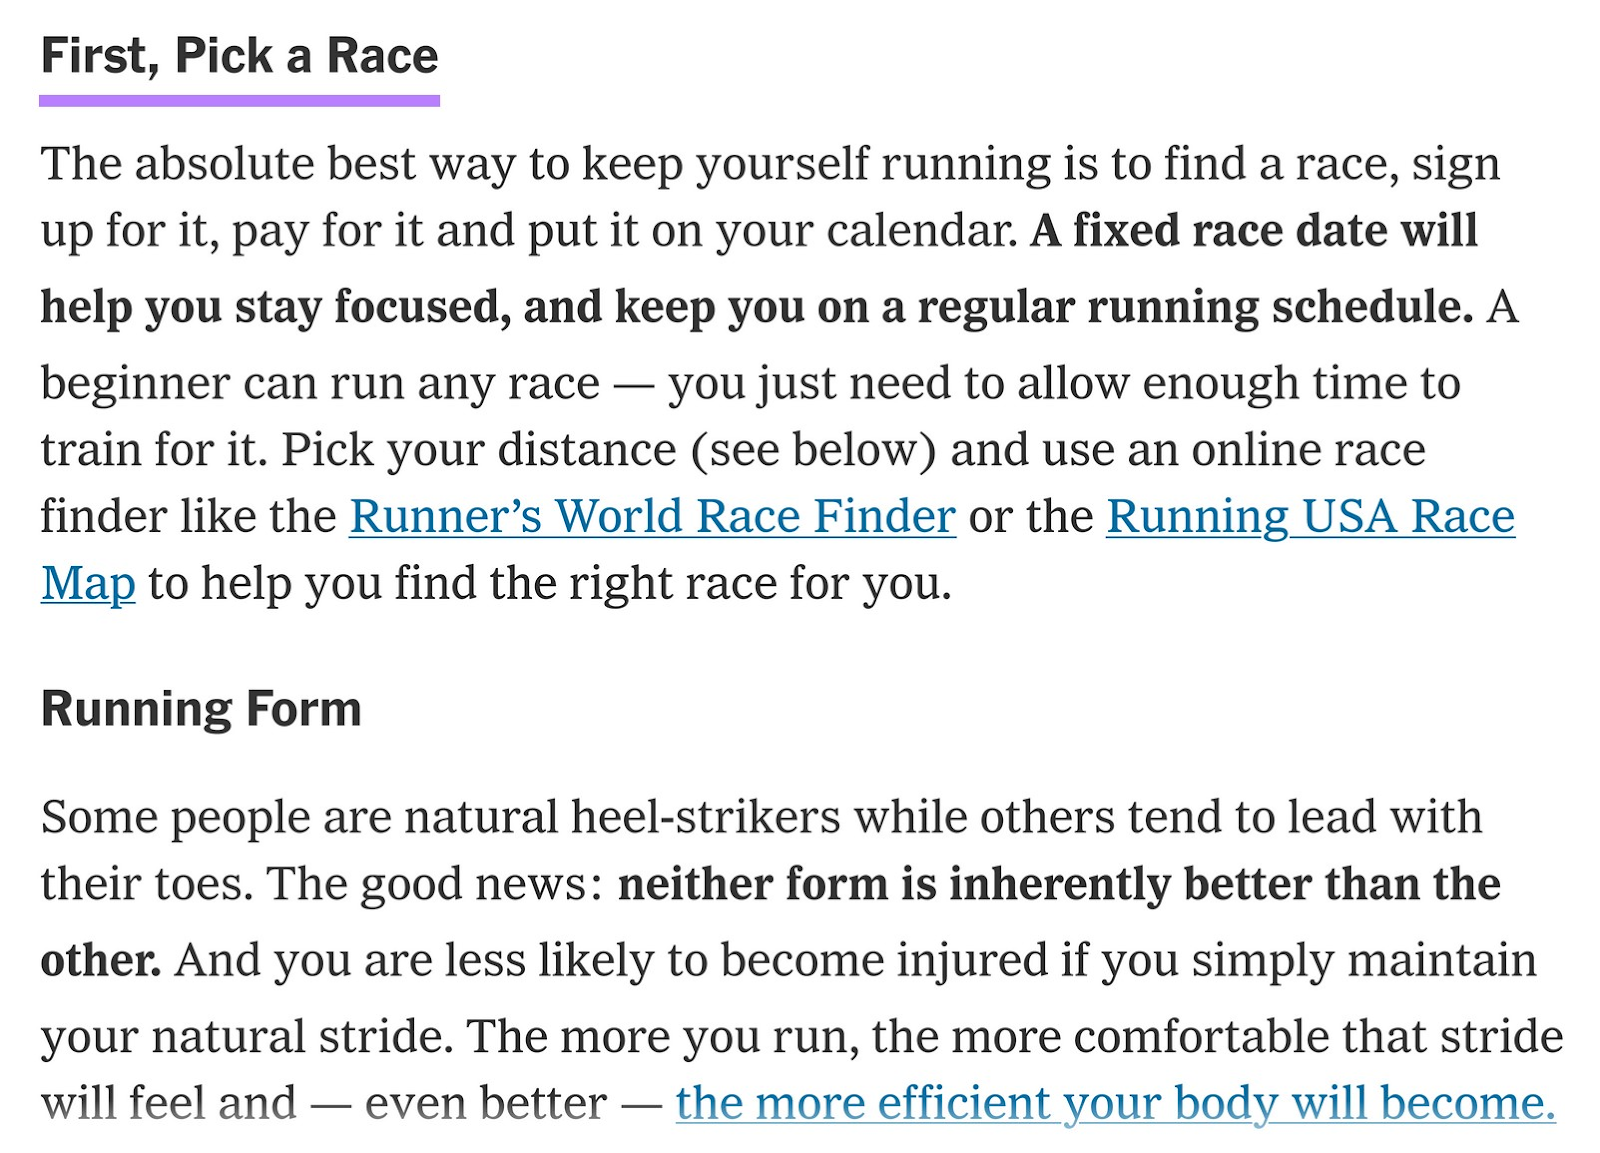 “First, Pick a Race” subheading